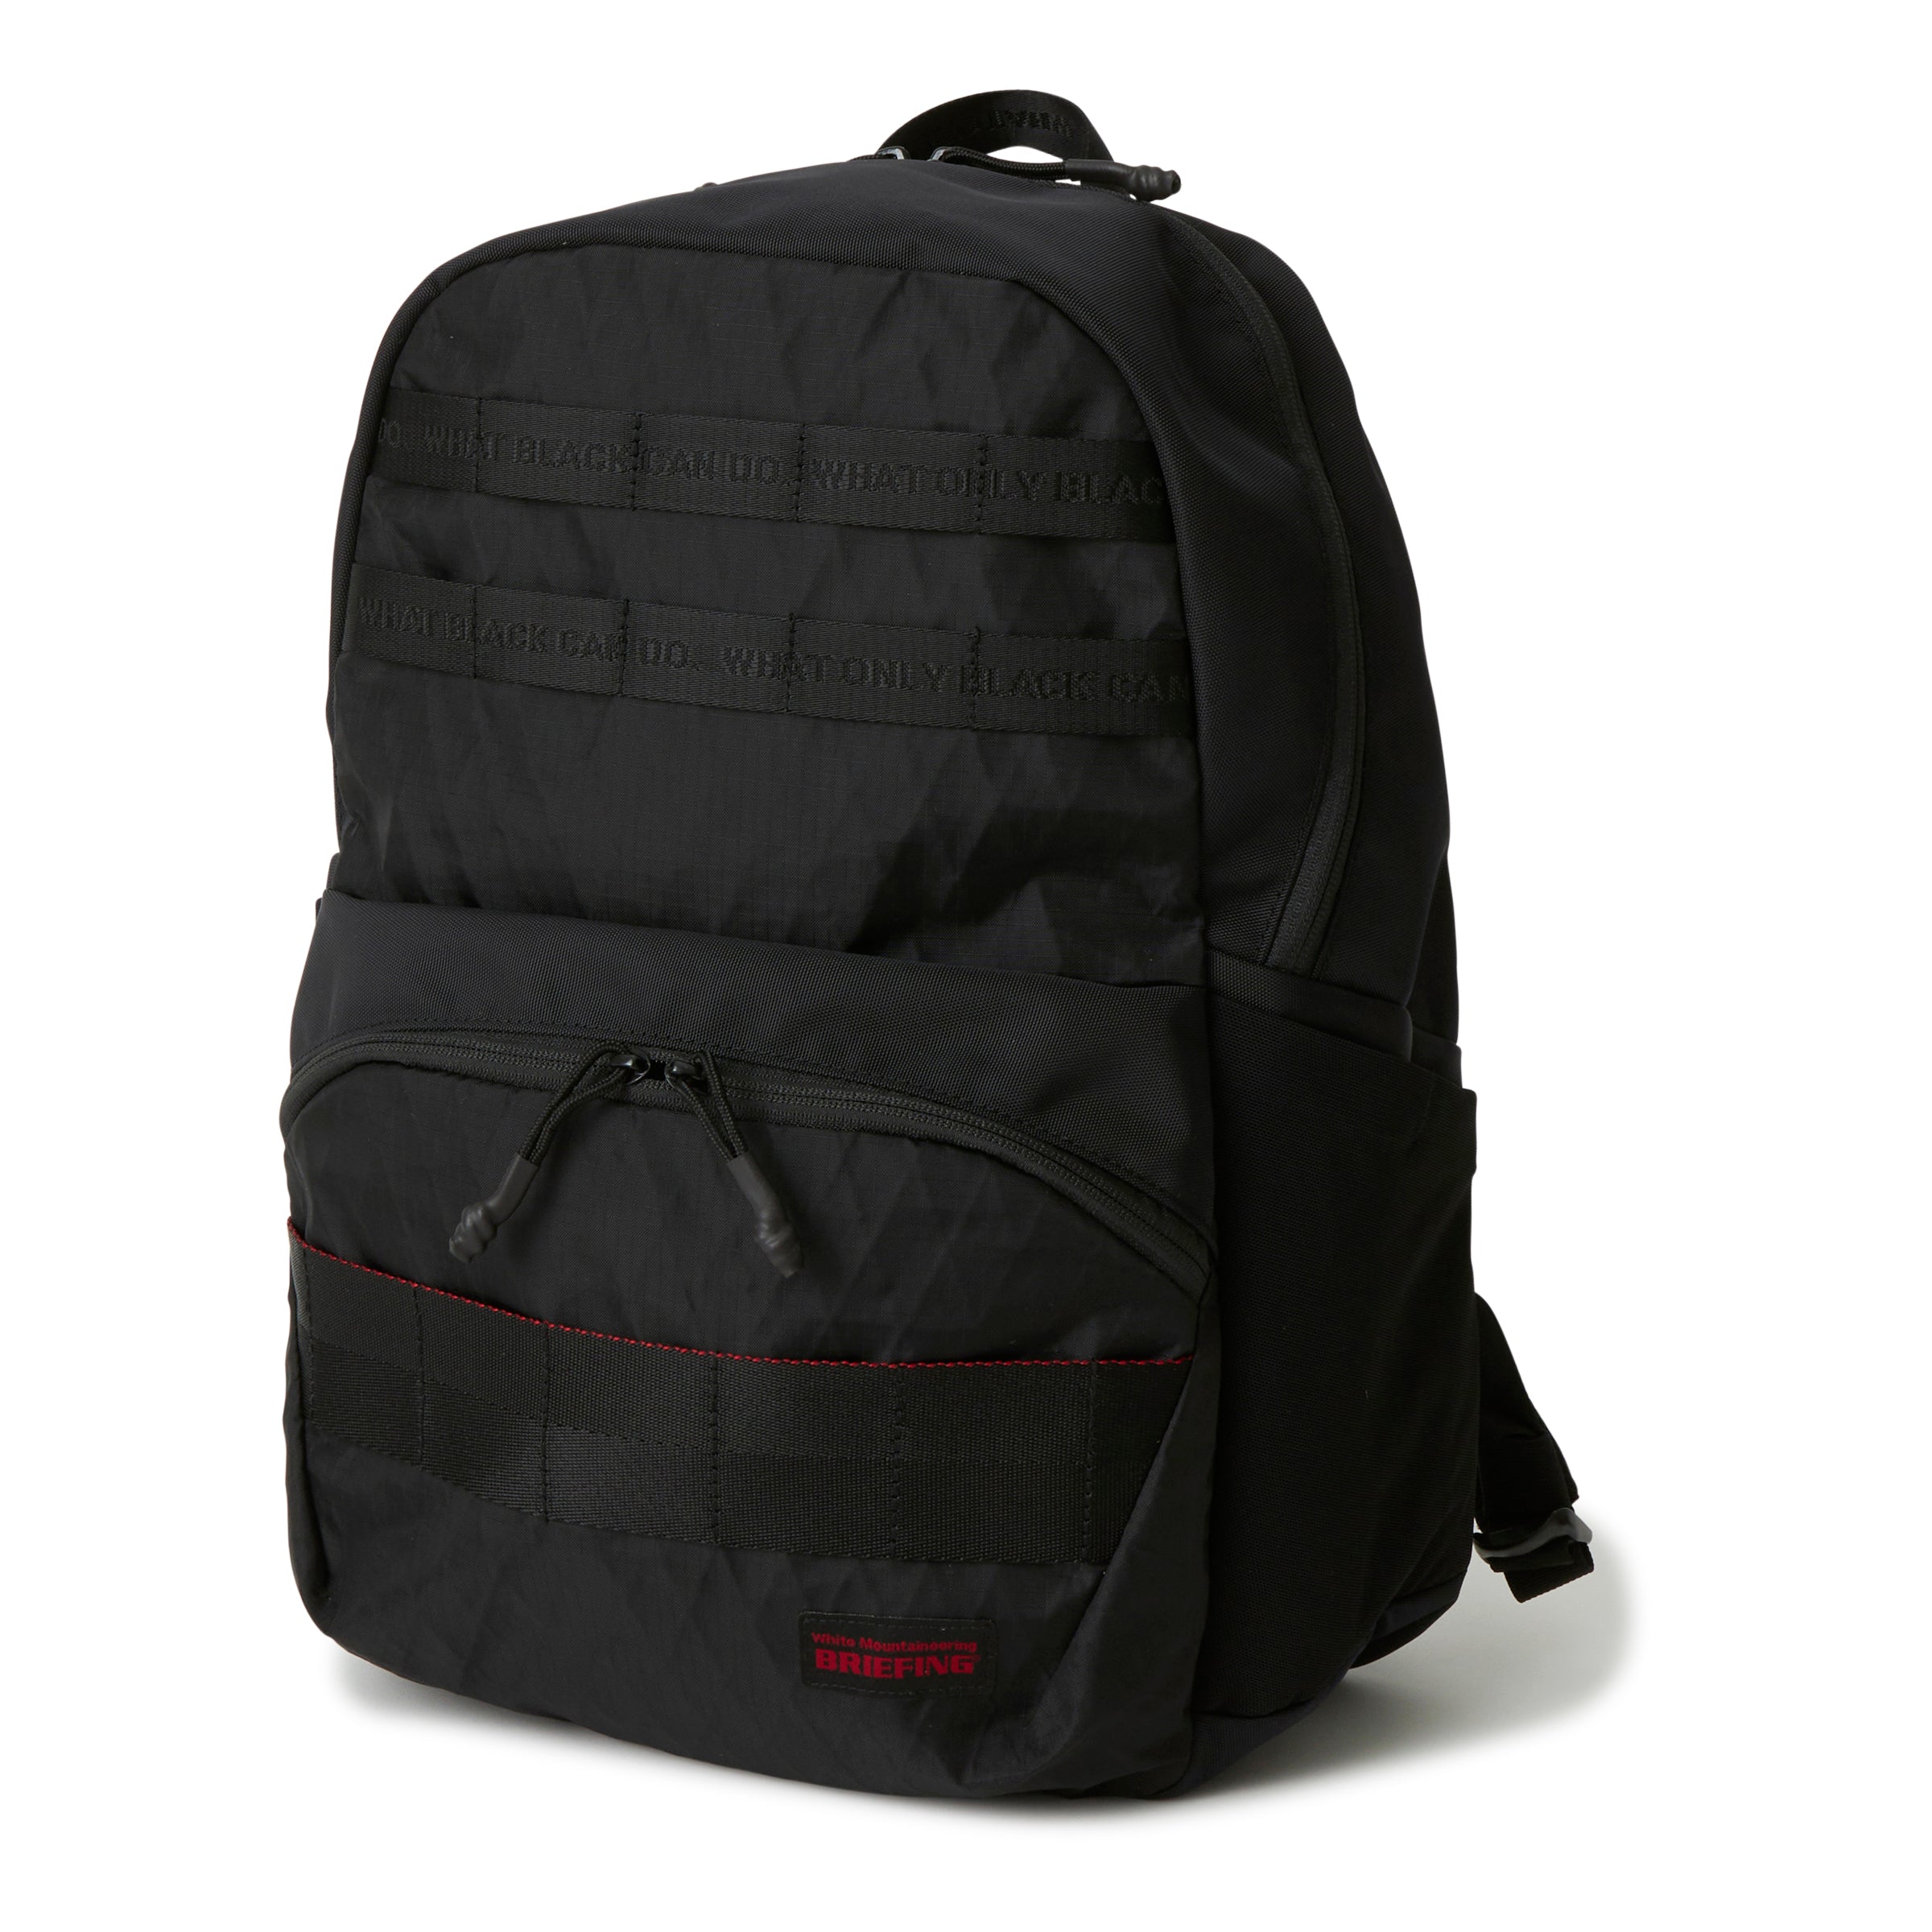 WM x BRIEFING X-PAC BACK PACK (BK2373801) | White Mountaineering 